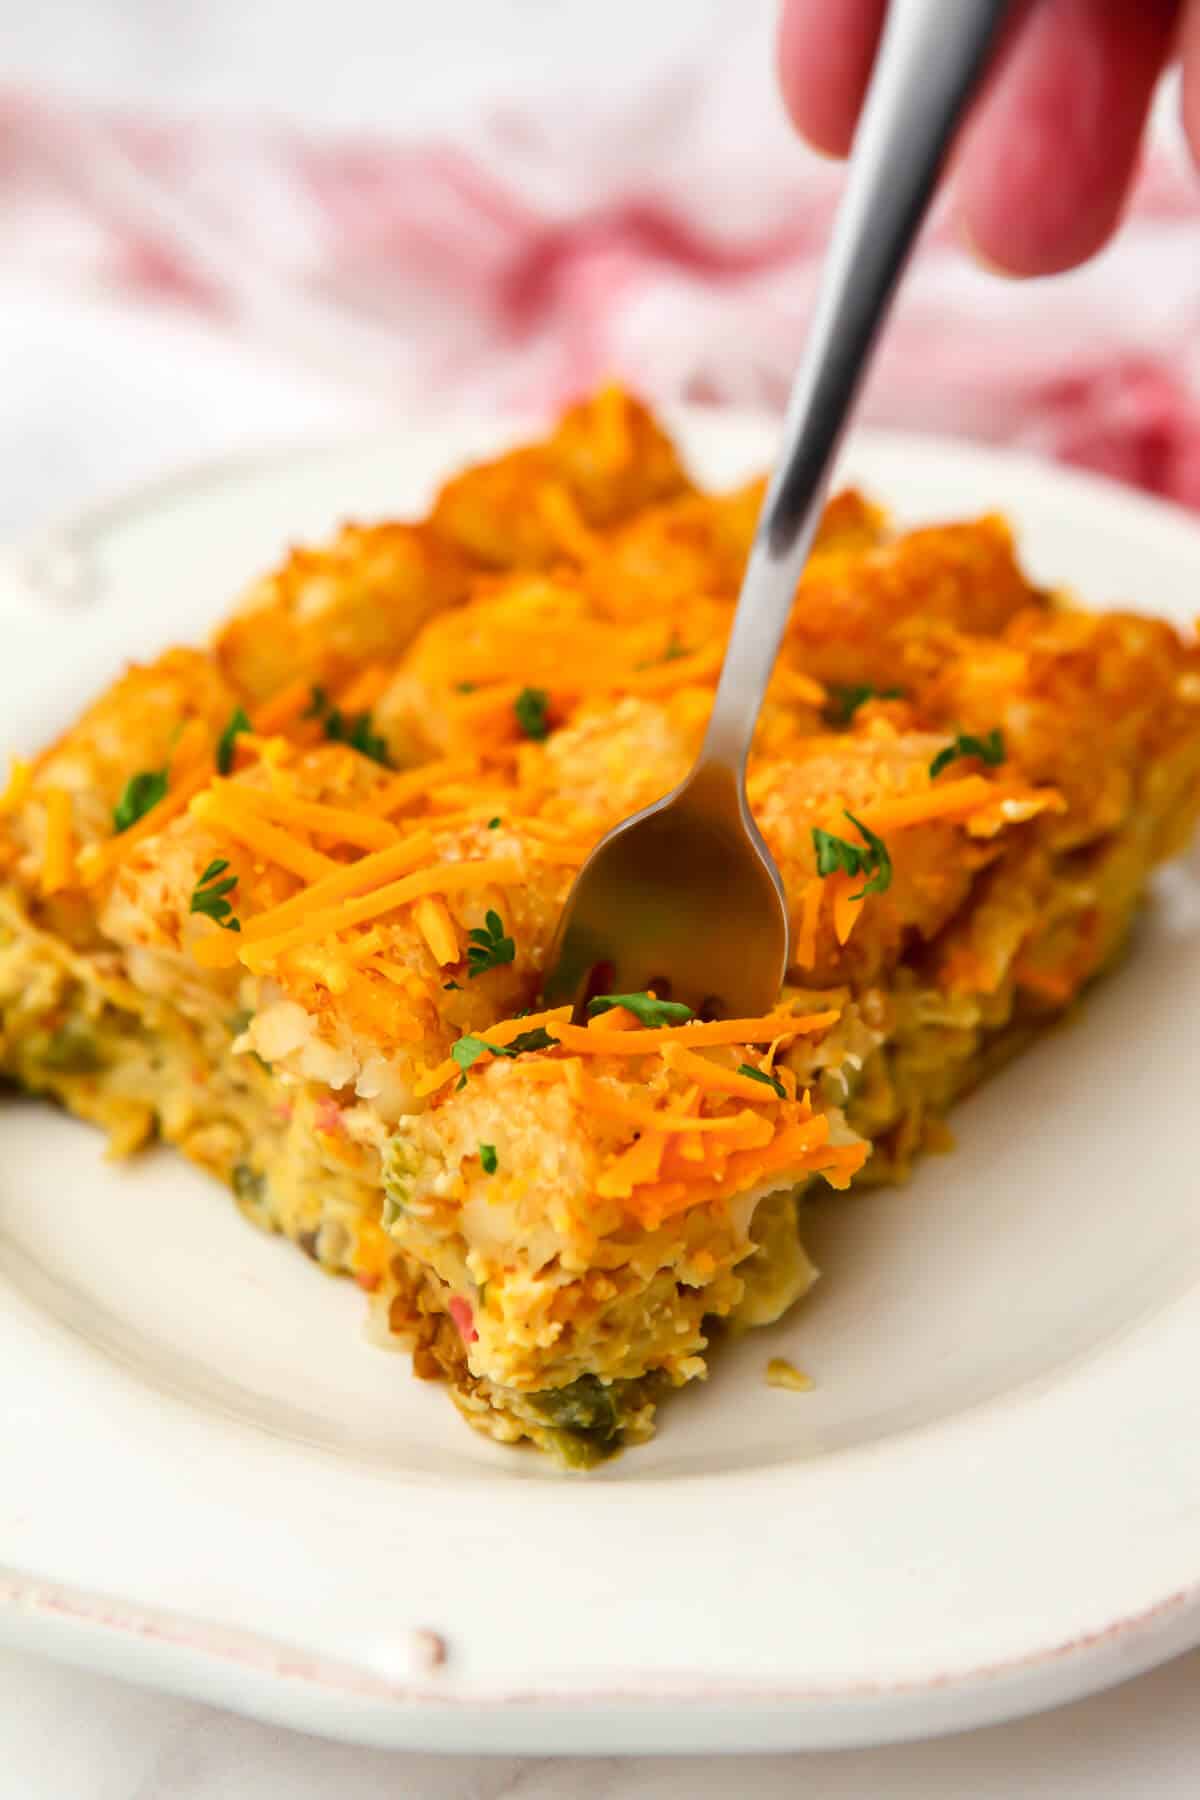 A serving of vegan breakfast casserole on a white plate with a fork in it.